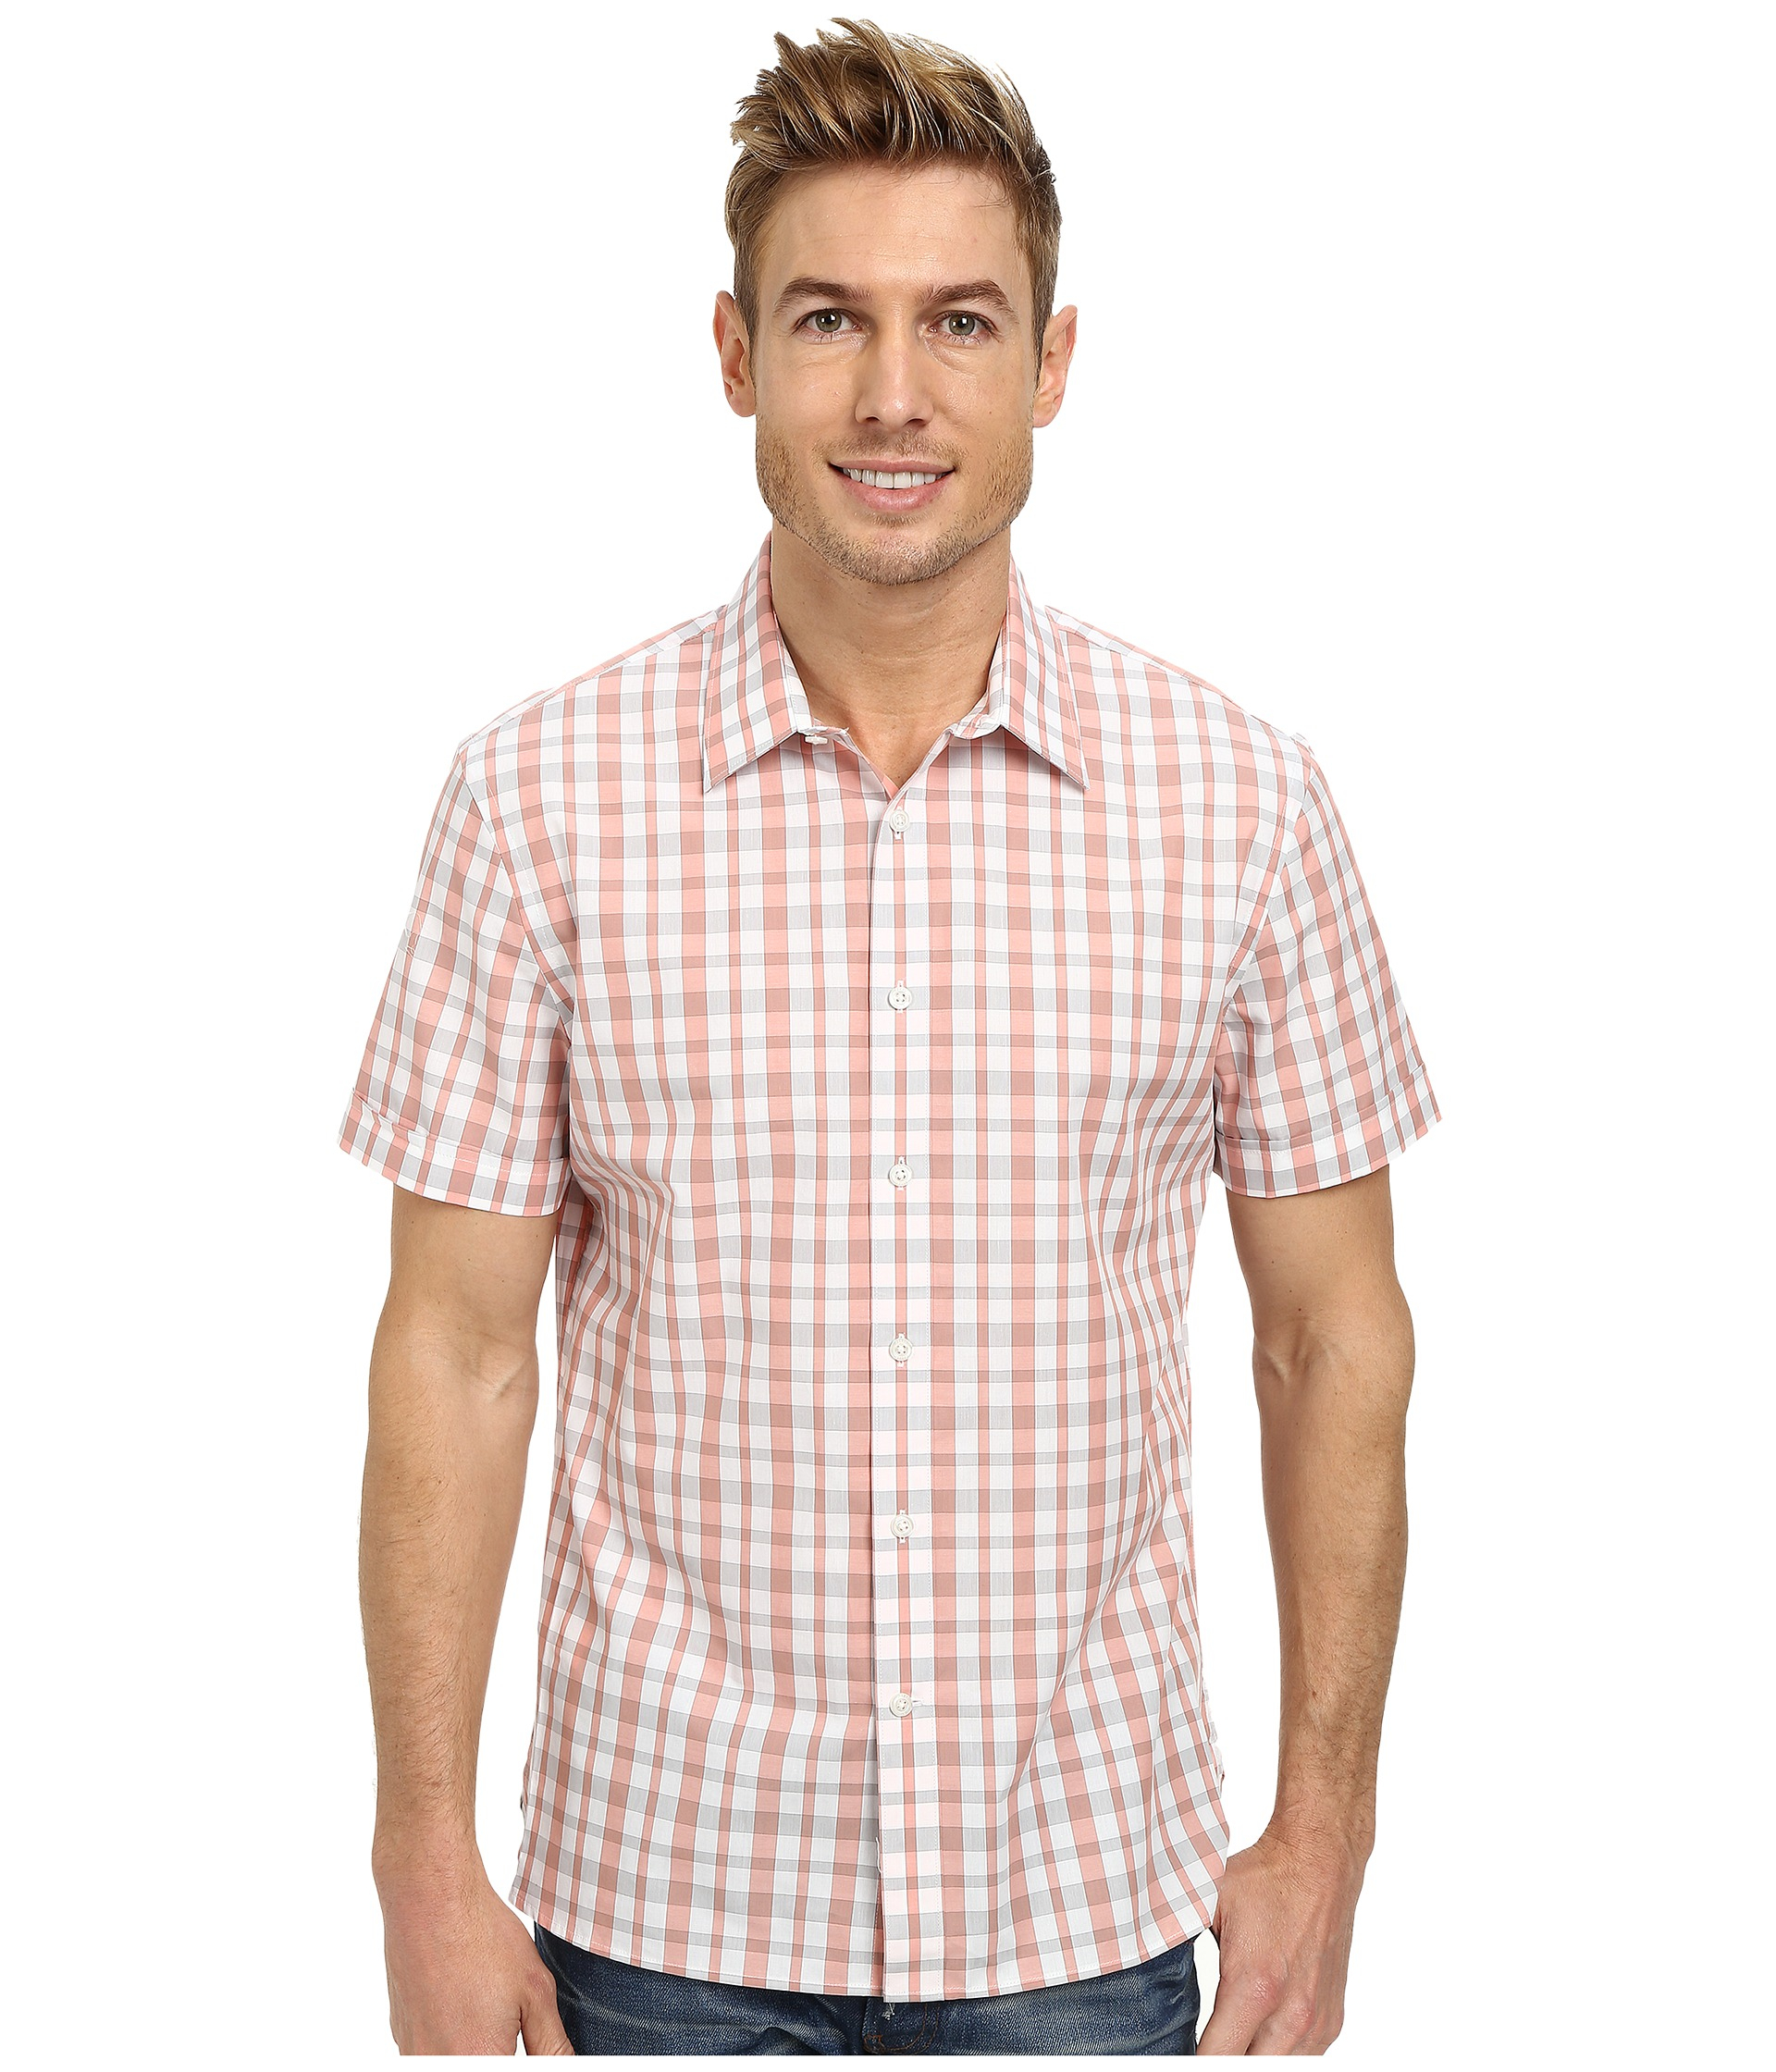 Lyst - Perry Ellis Short Sleeve Plaid Pattern Shirt in Pink for Men